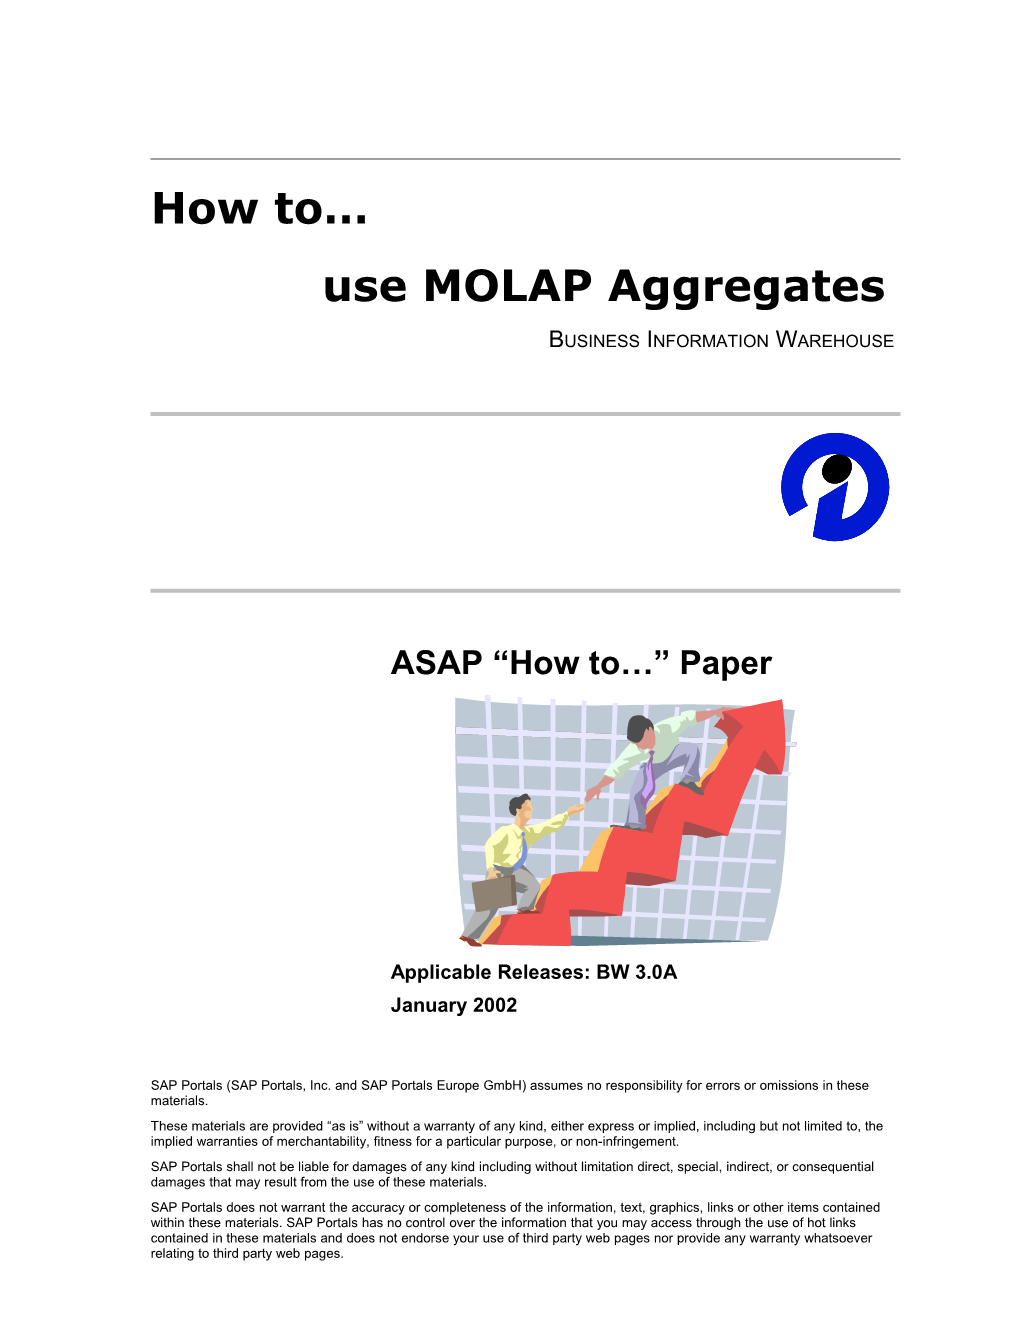 How to Use MOLAP Aggregates